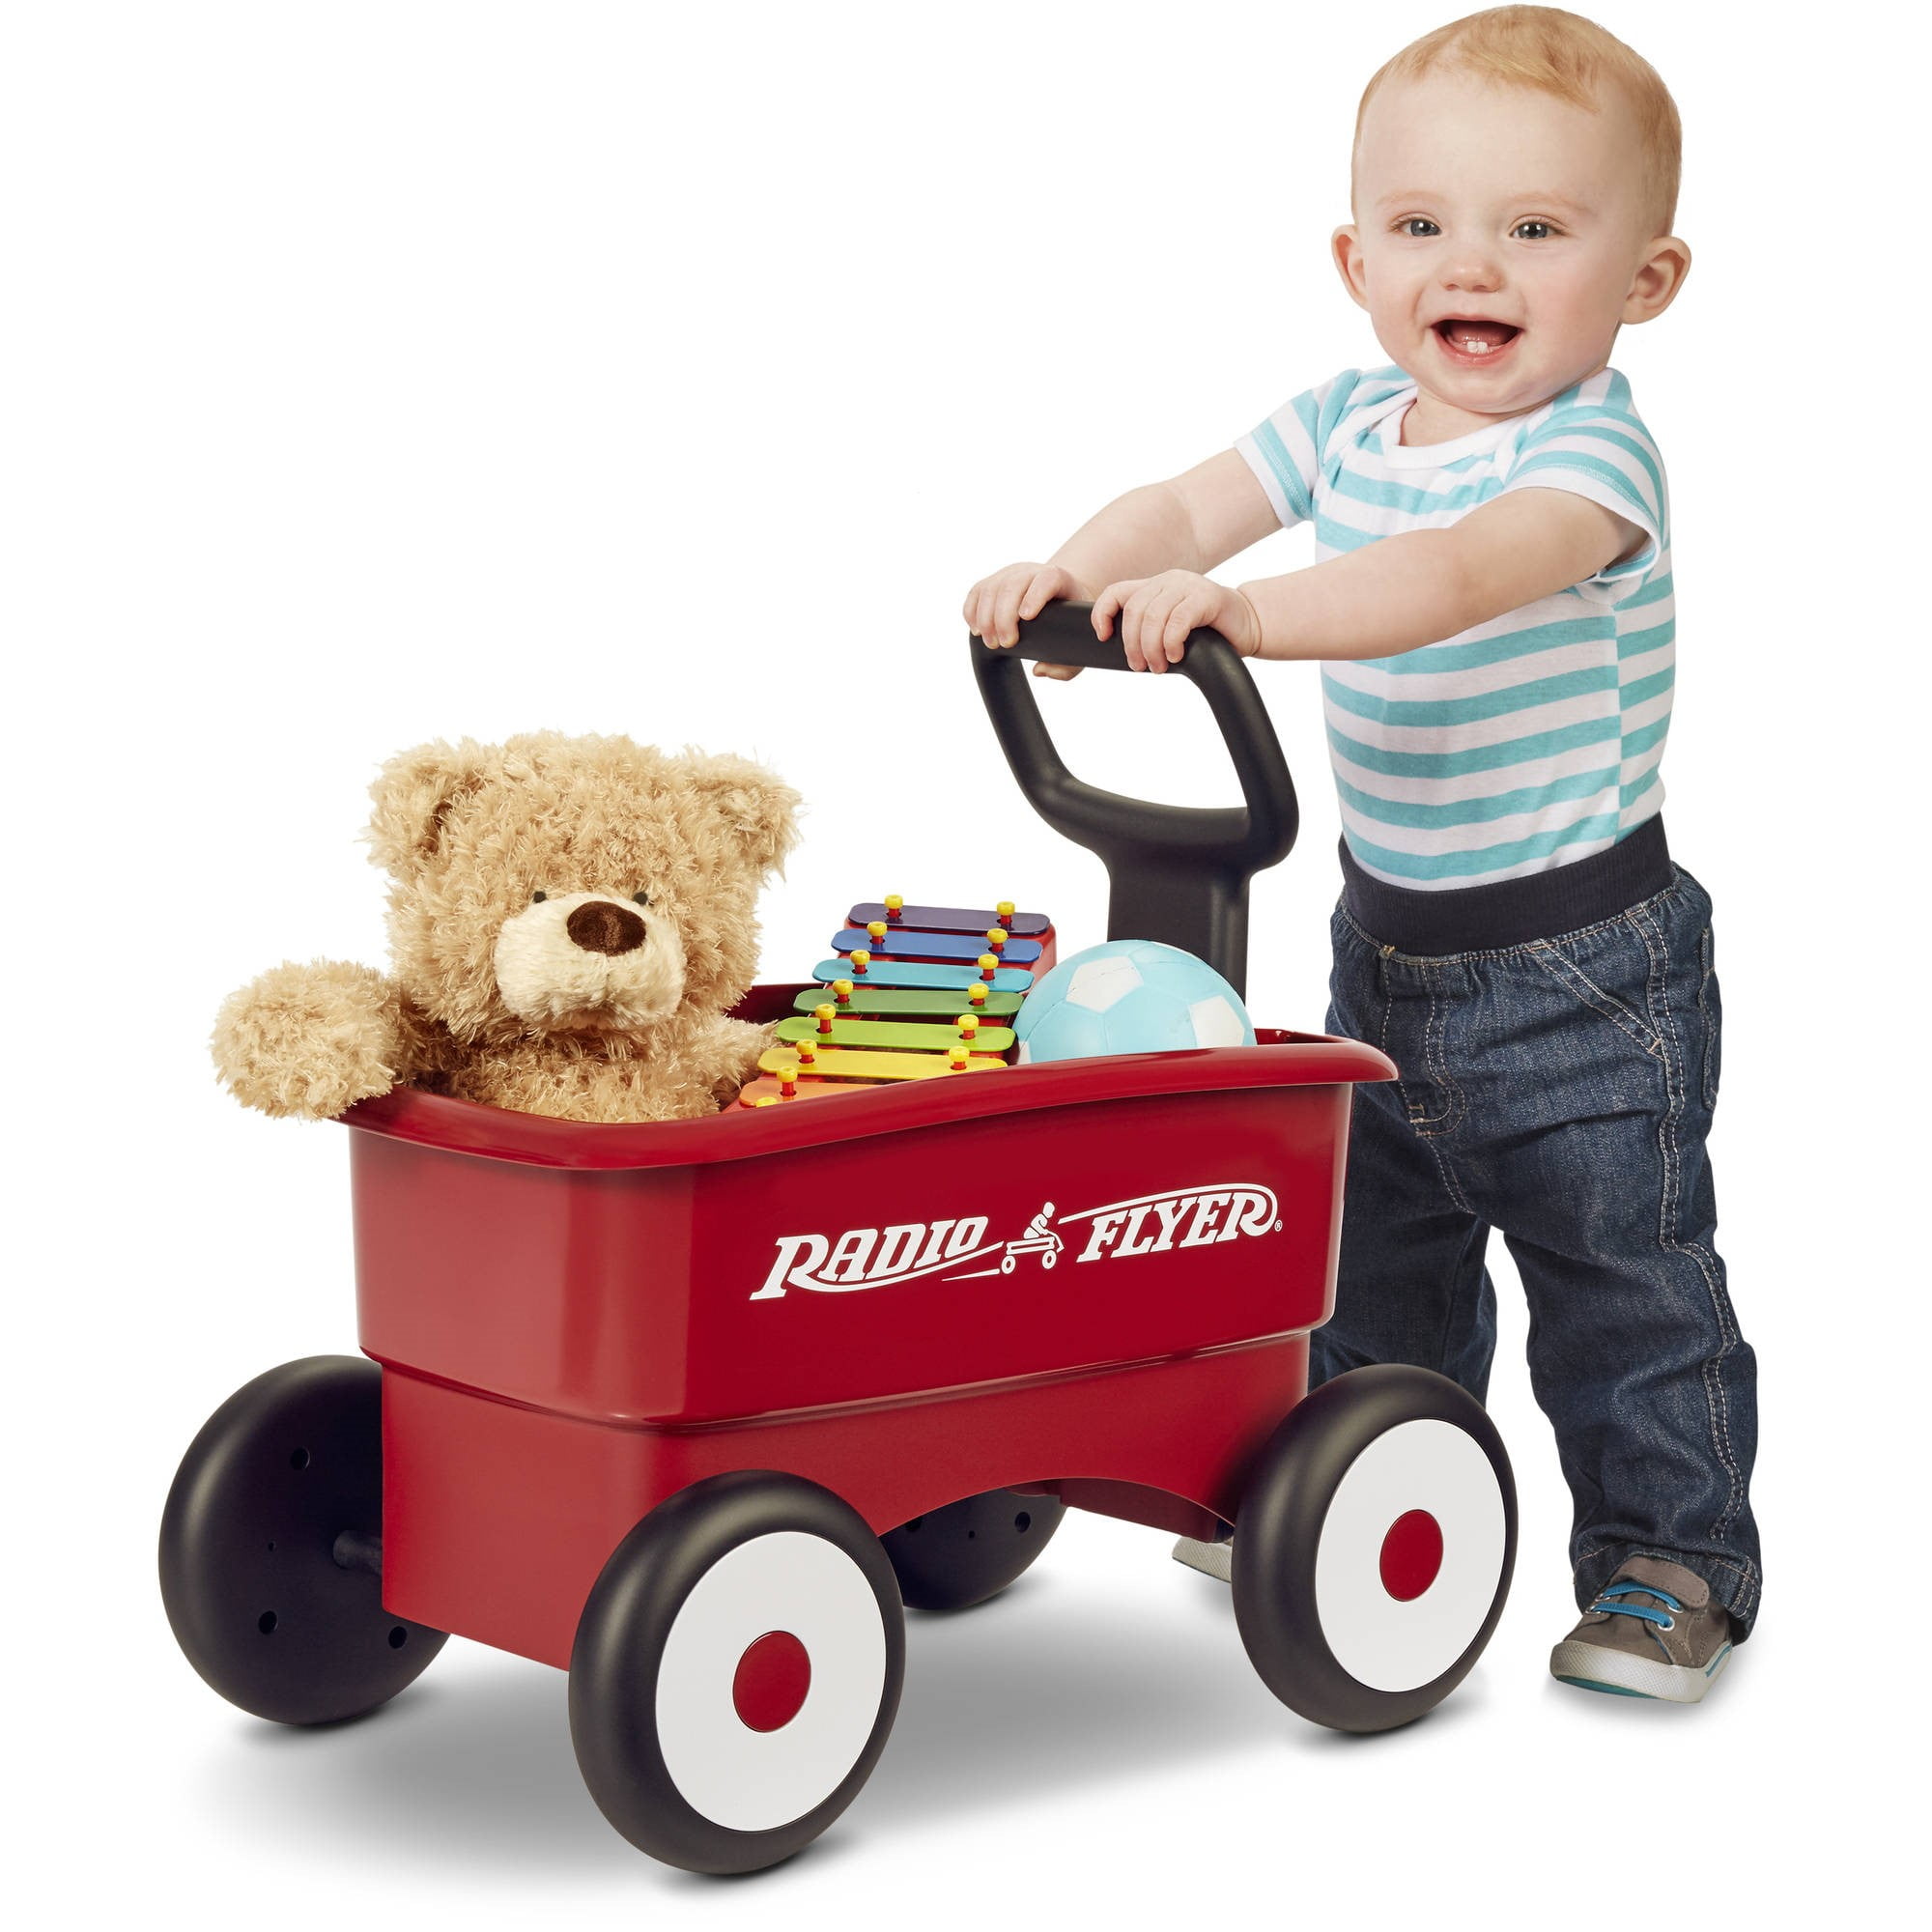 for sale online Durable Radio Flyer My 1st Red Wagon Great 2018 Christmas Toy 